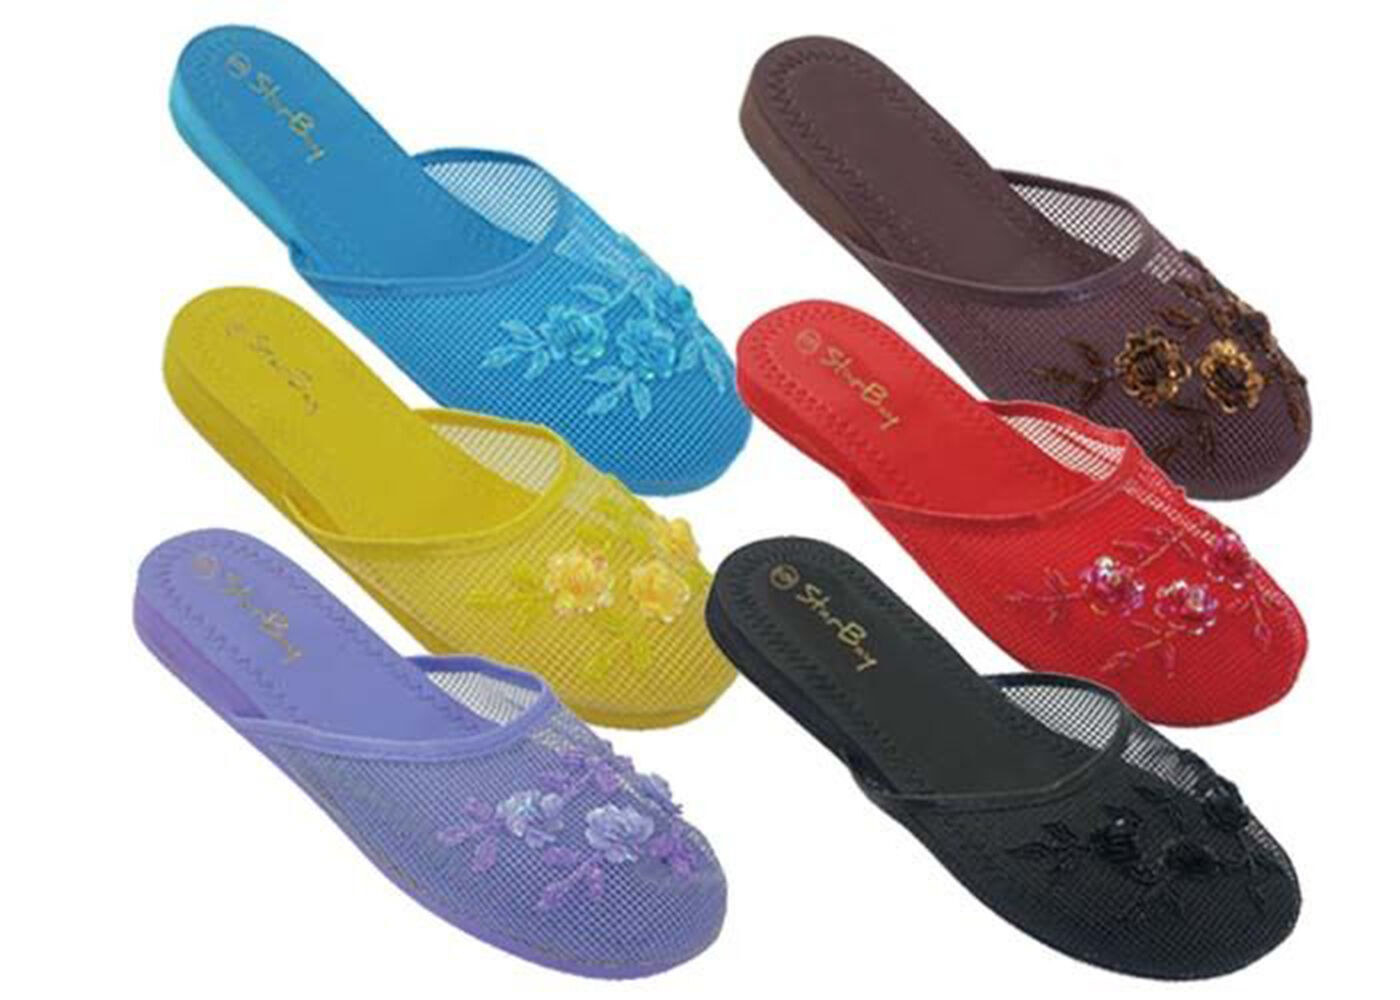 Six different mesh sandals in purple, yellow, teal, black, red, and brown